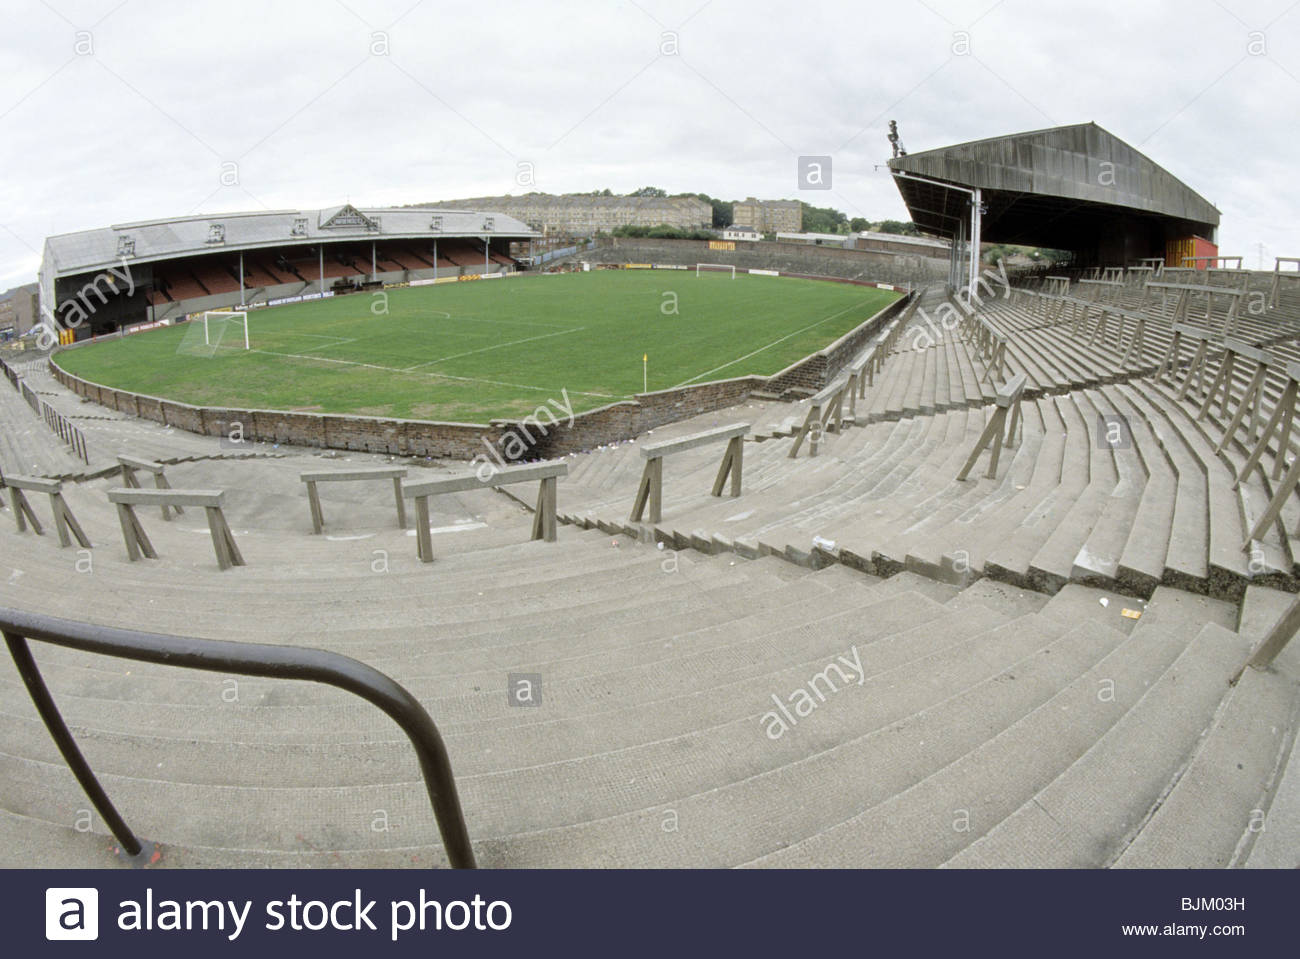 Image result for old firhill stadium